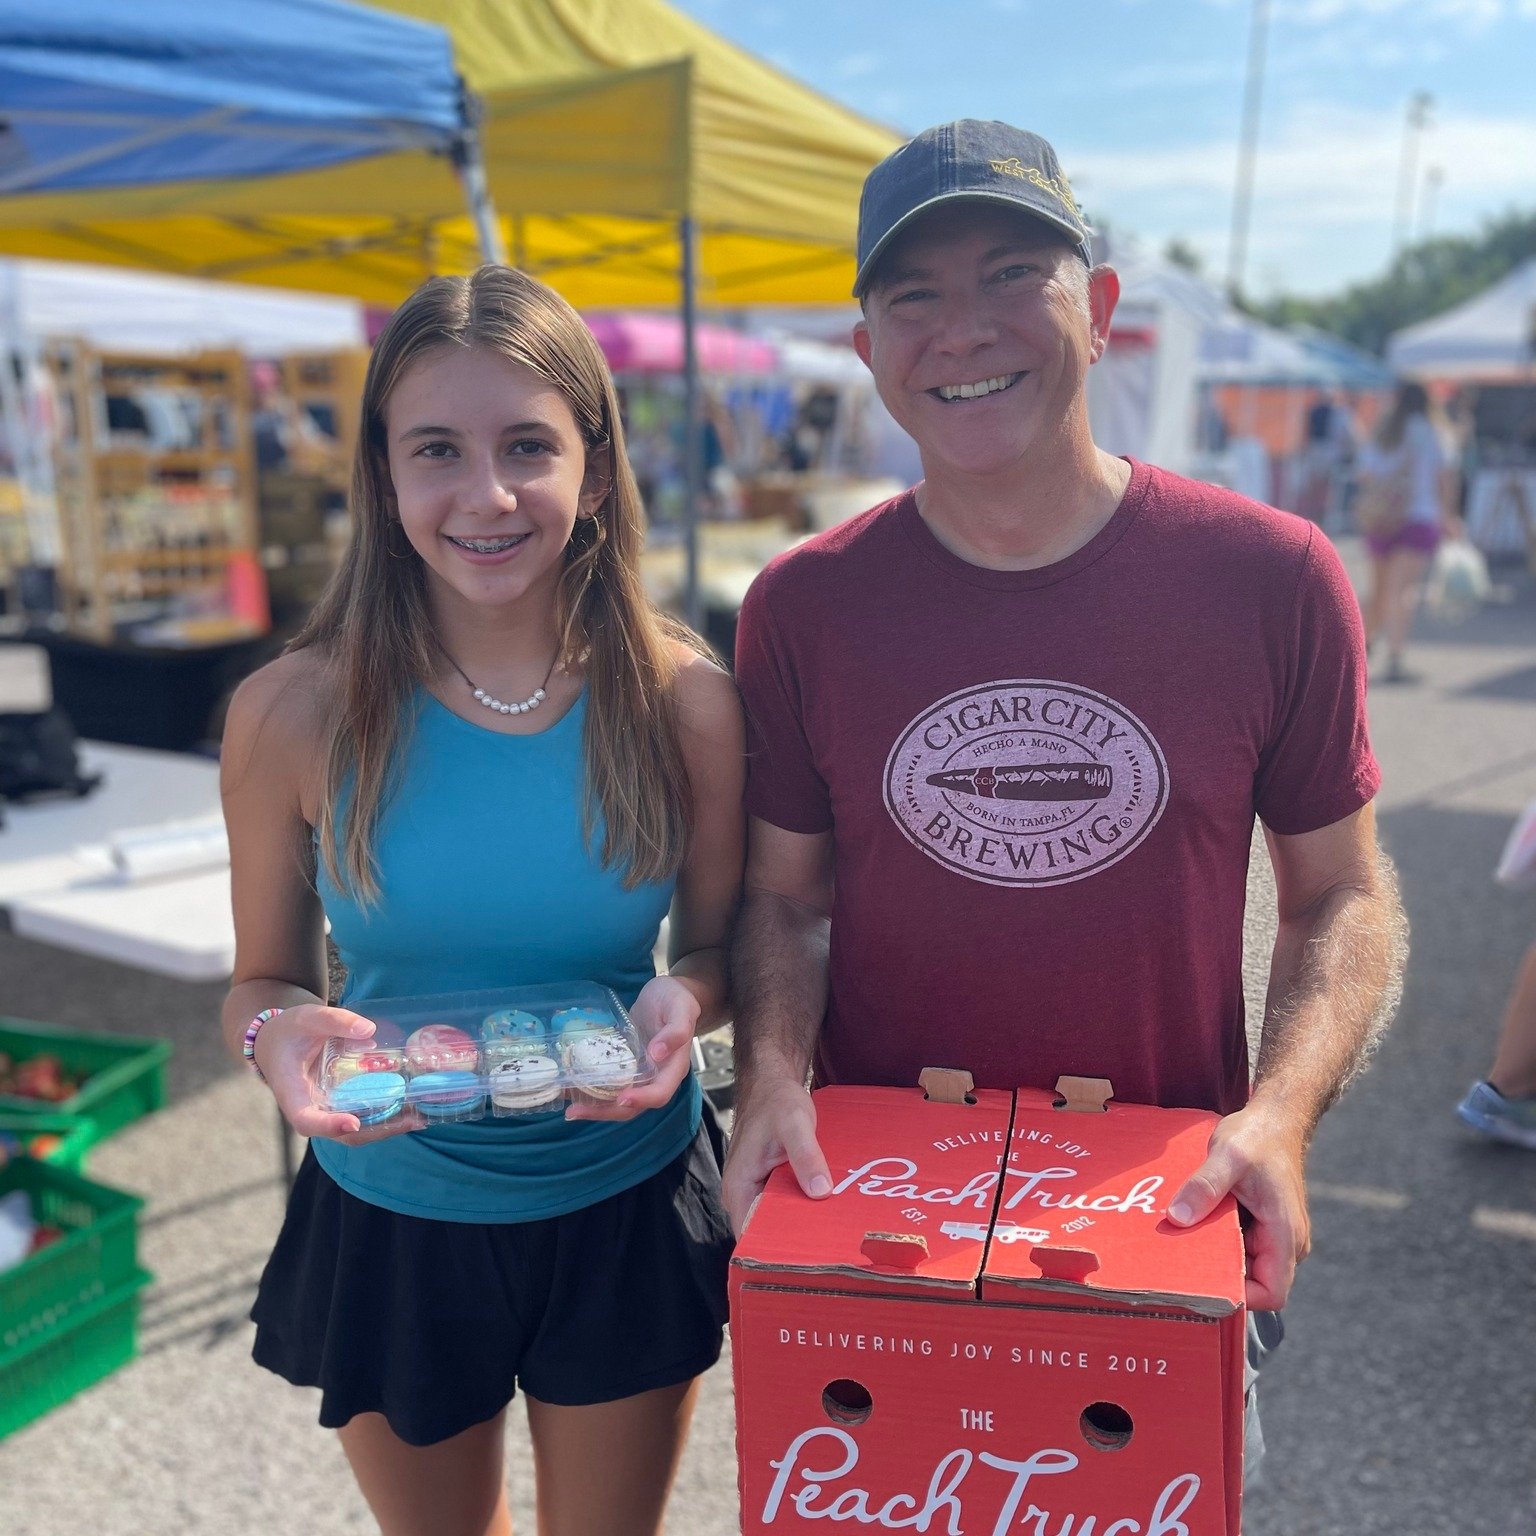 The countdown is on! Just one week until the Nolensville Farmers Market kicks off its summer season on May 4th. Get ready for a summer filled with fresh produce, local artisans, and community fun! #SummerMarketCountdown #SupportLocal